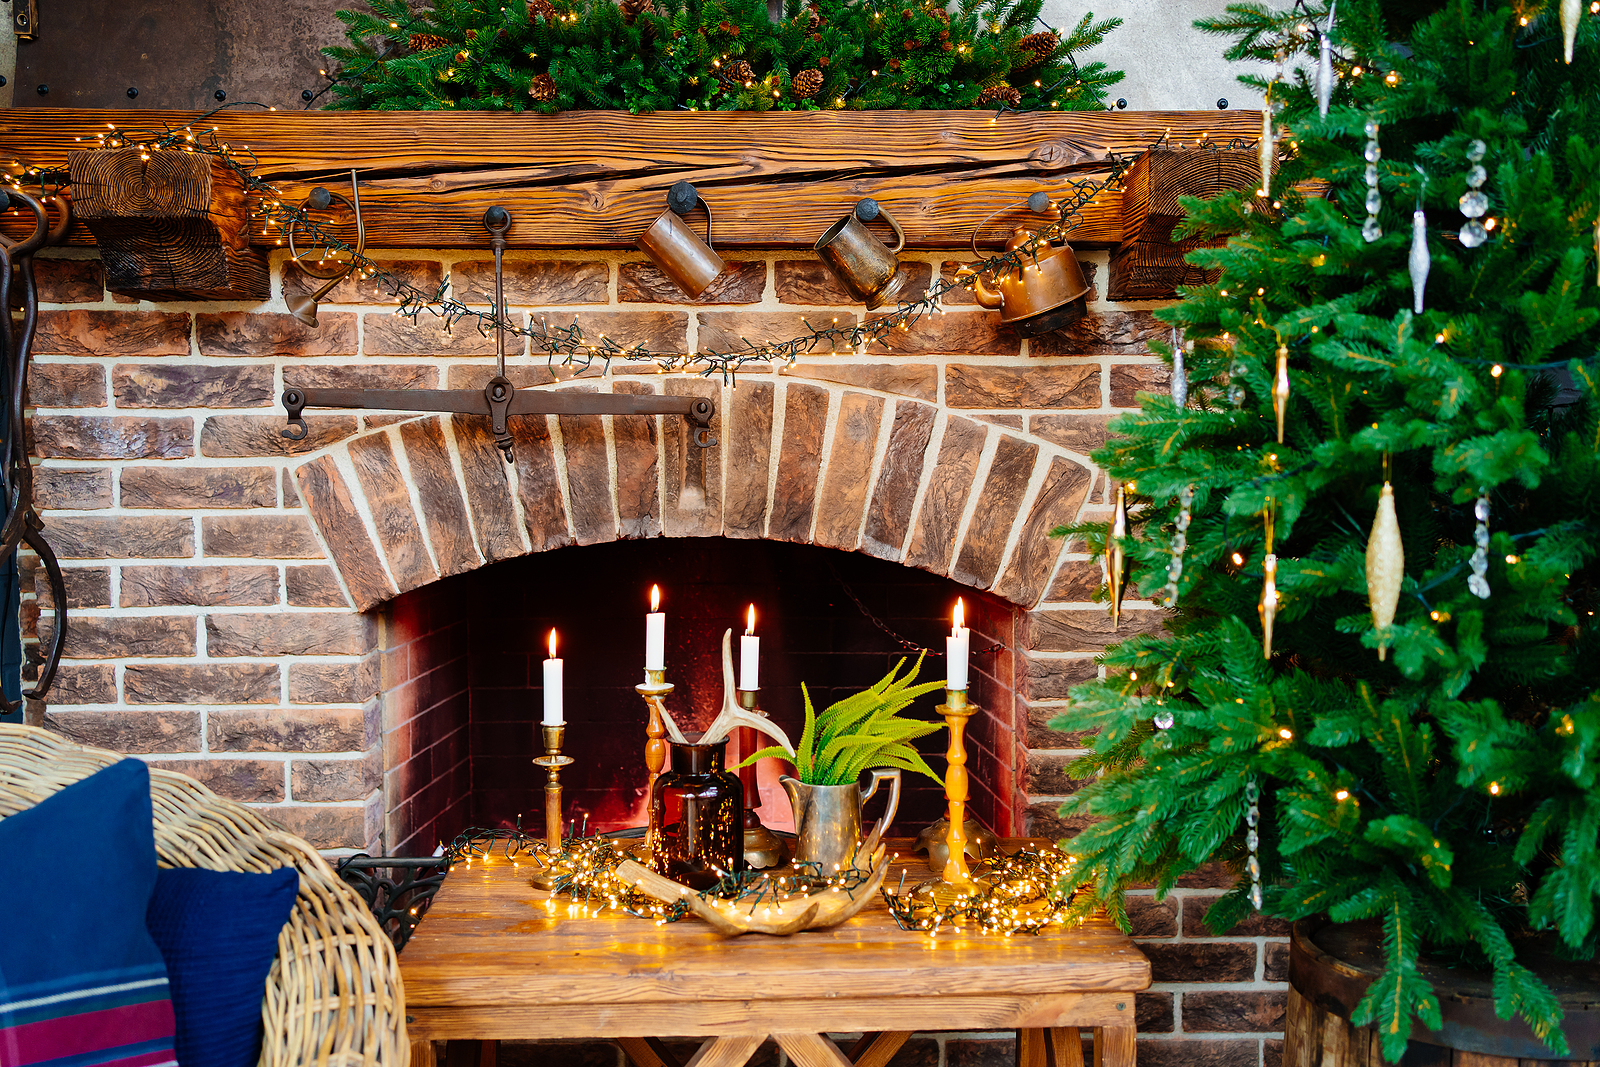 Is-the-brick-fireplace-in-your-historic-brick-home-ready-for-winter-Renaissance-Development-Washington-DC